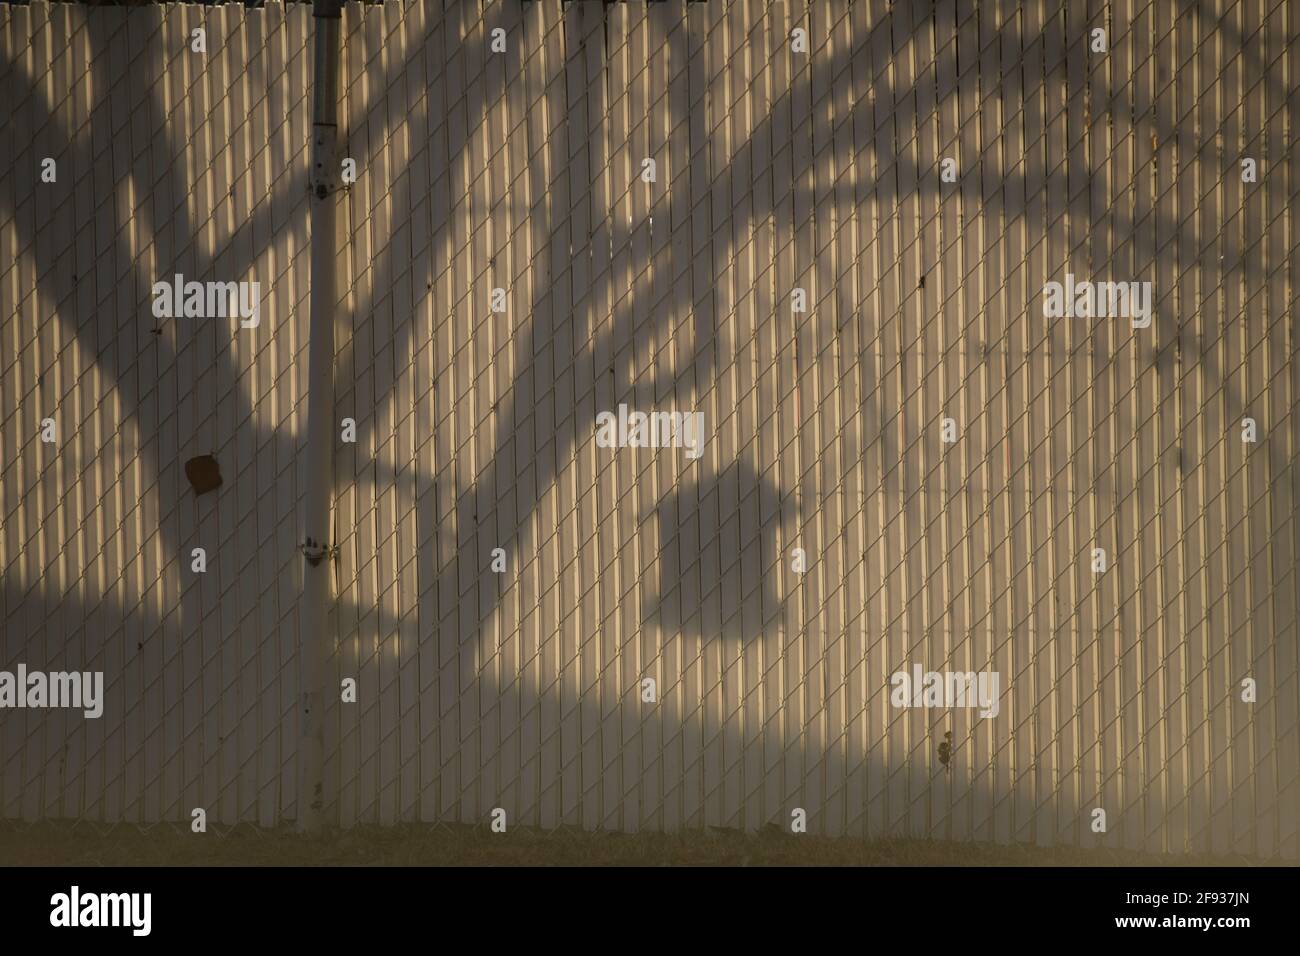 shadows on fence of bird feeder hanging on tree in urban neighbourhood white fence black shadow of tree branches empty space for type morning sunlight Stock Photo